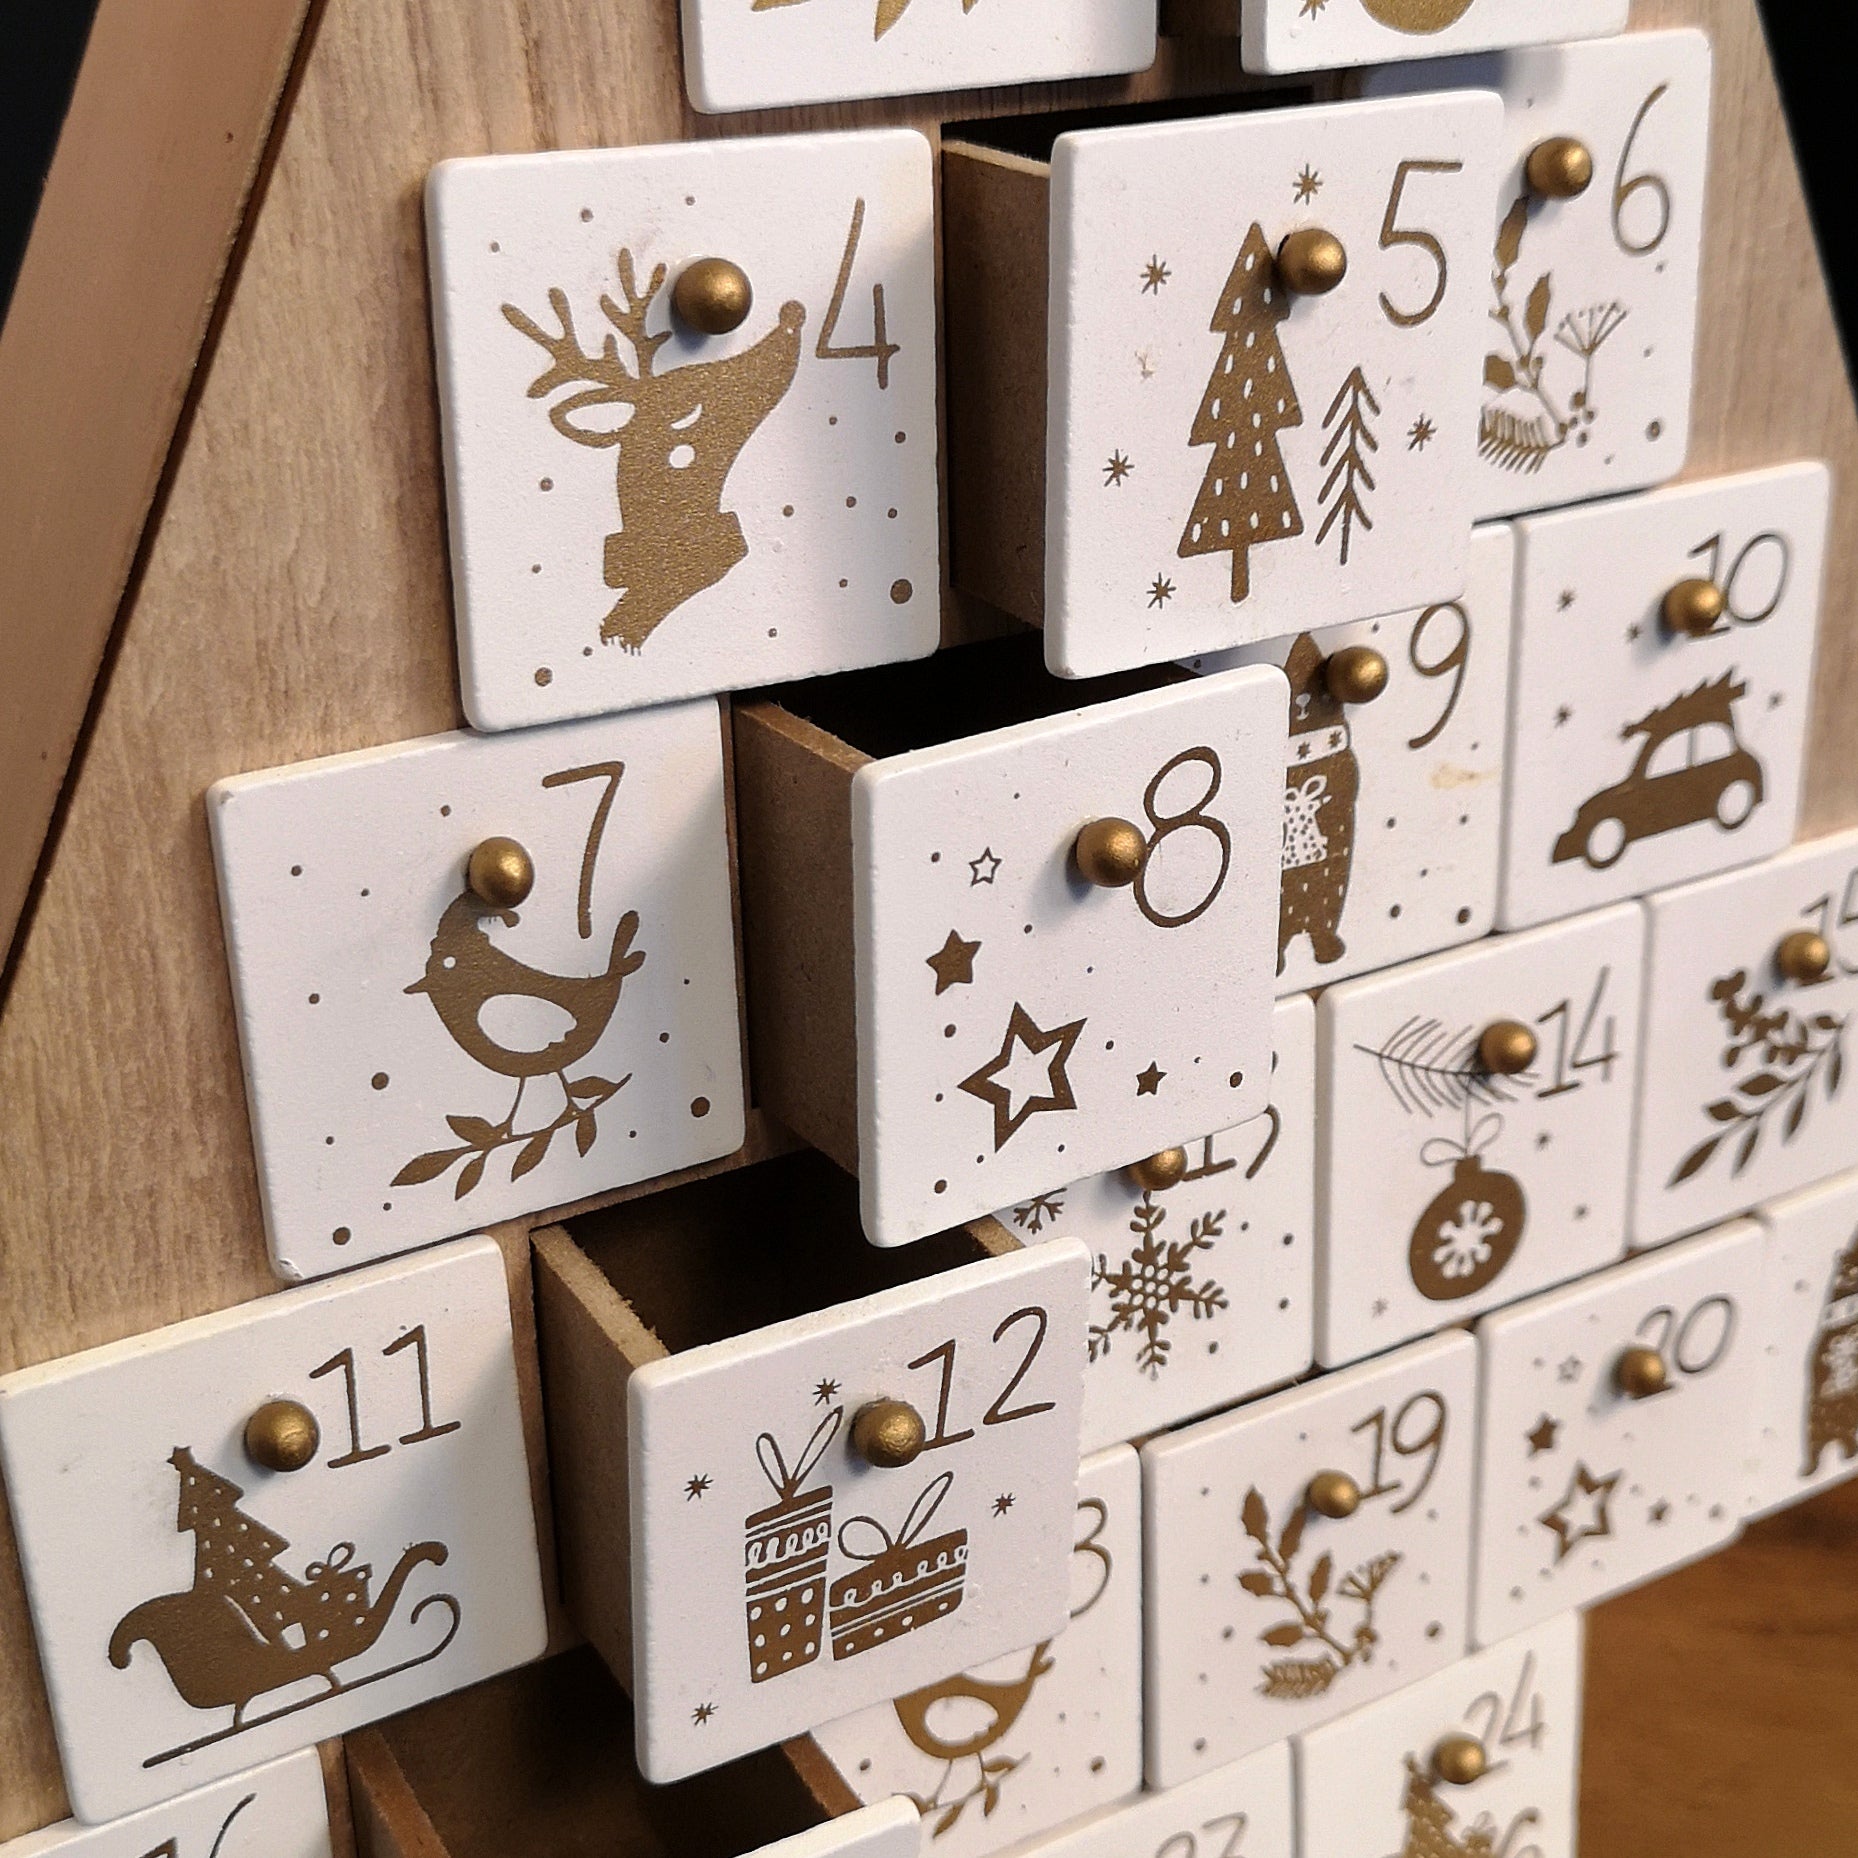 38cm Traditional Wooden Tree Advent Calendar Christmas Decoration with White Drawers